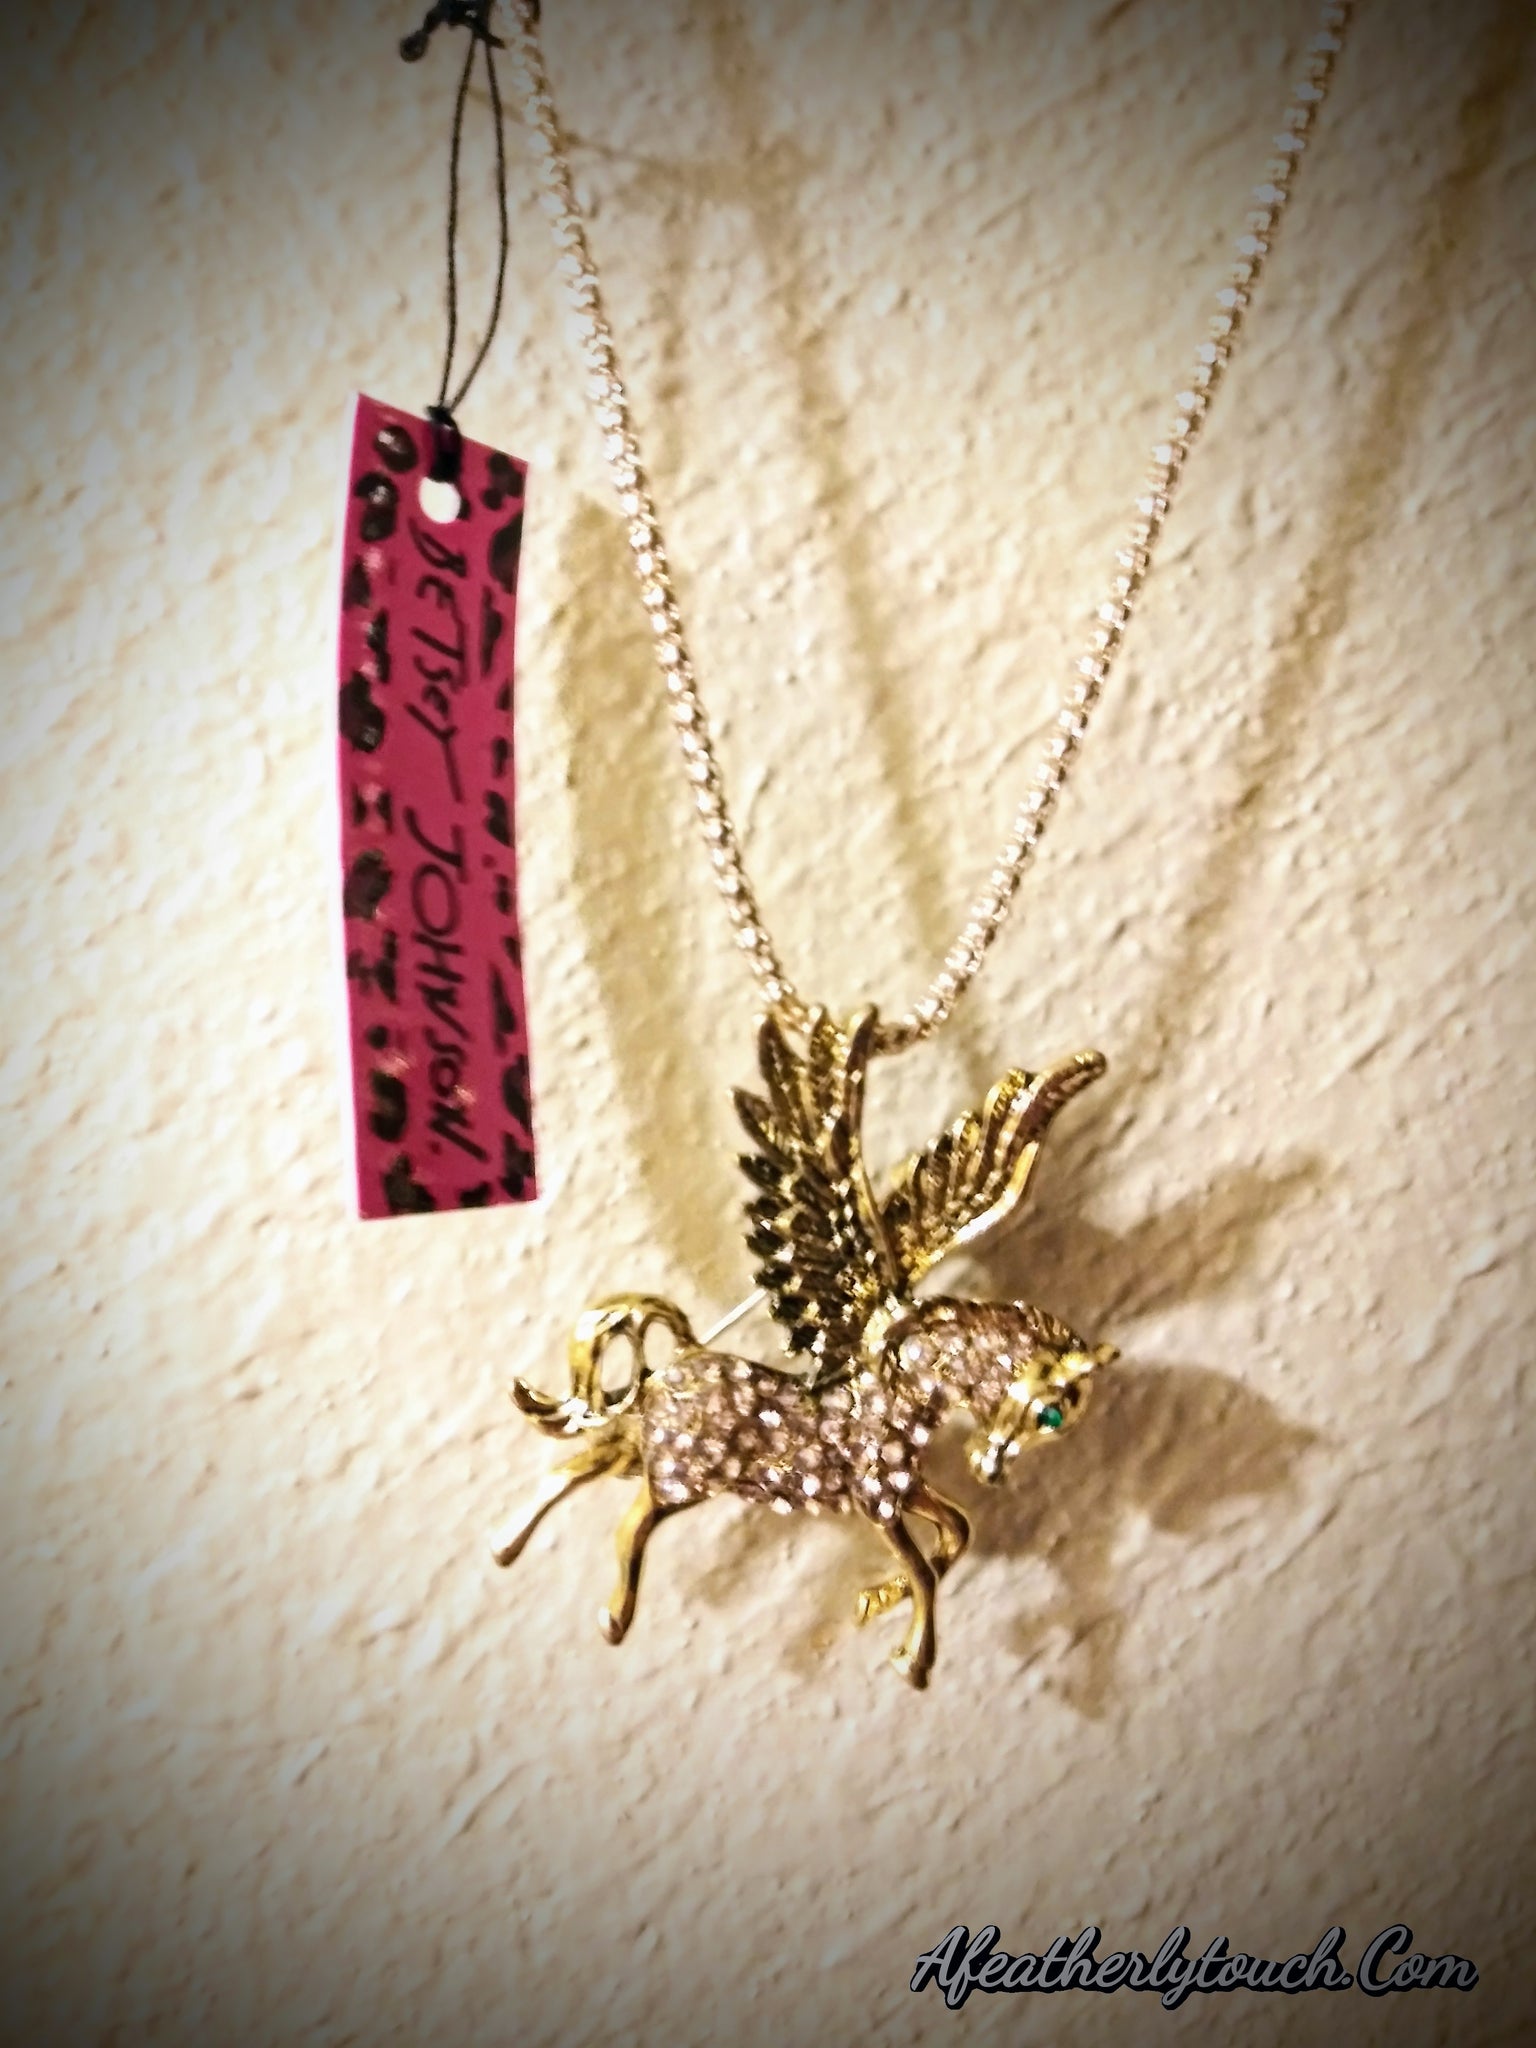 BETSEY JOHNSON GOLD AND CRYSTAL PEGASUS HORSE PENDANT/BROACH